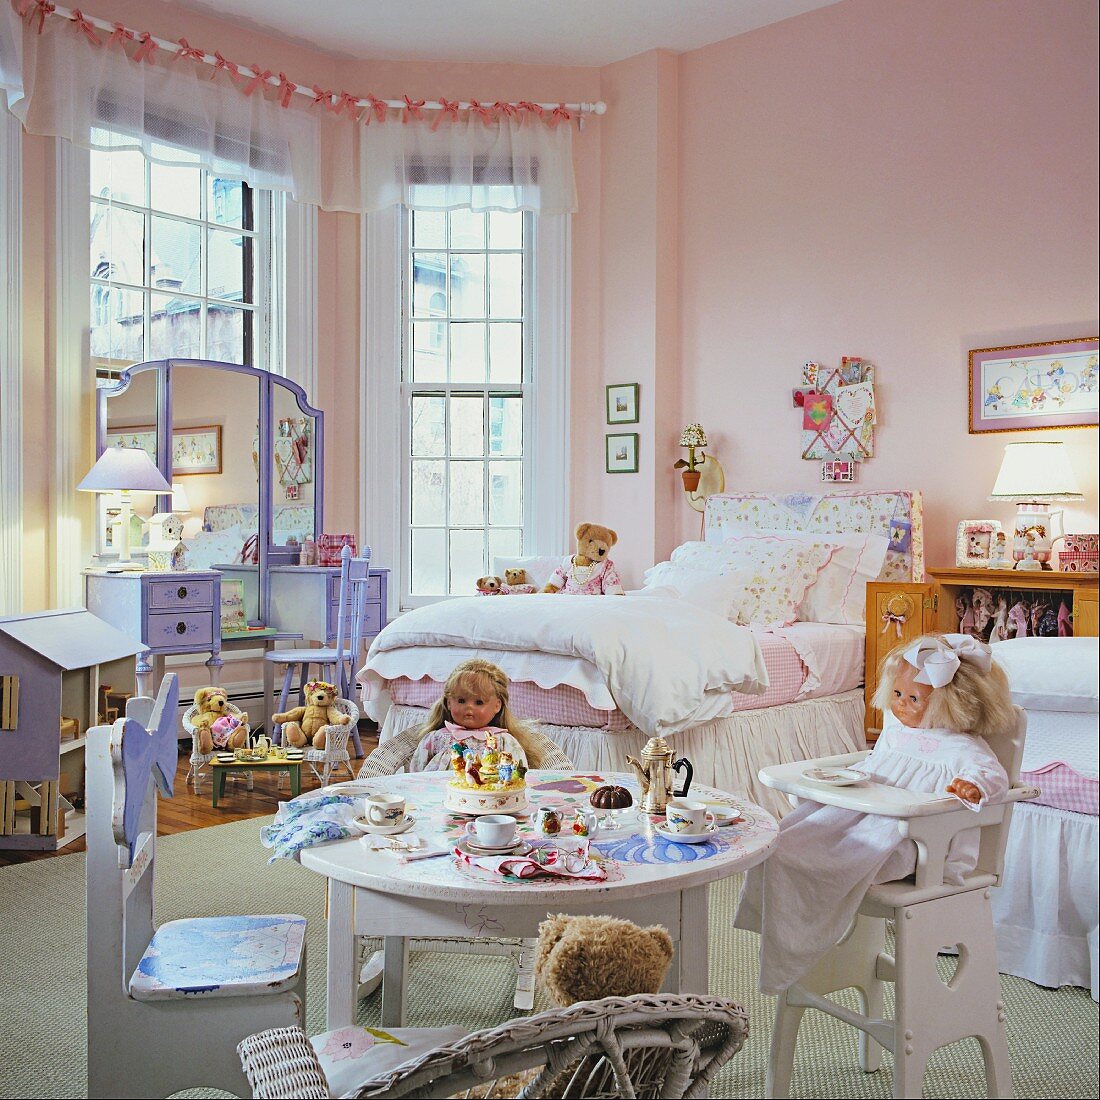 Child's bedroom in pink and light blue with ornate bed and children's furniture with dolls and soft toys